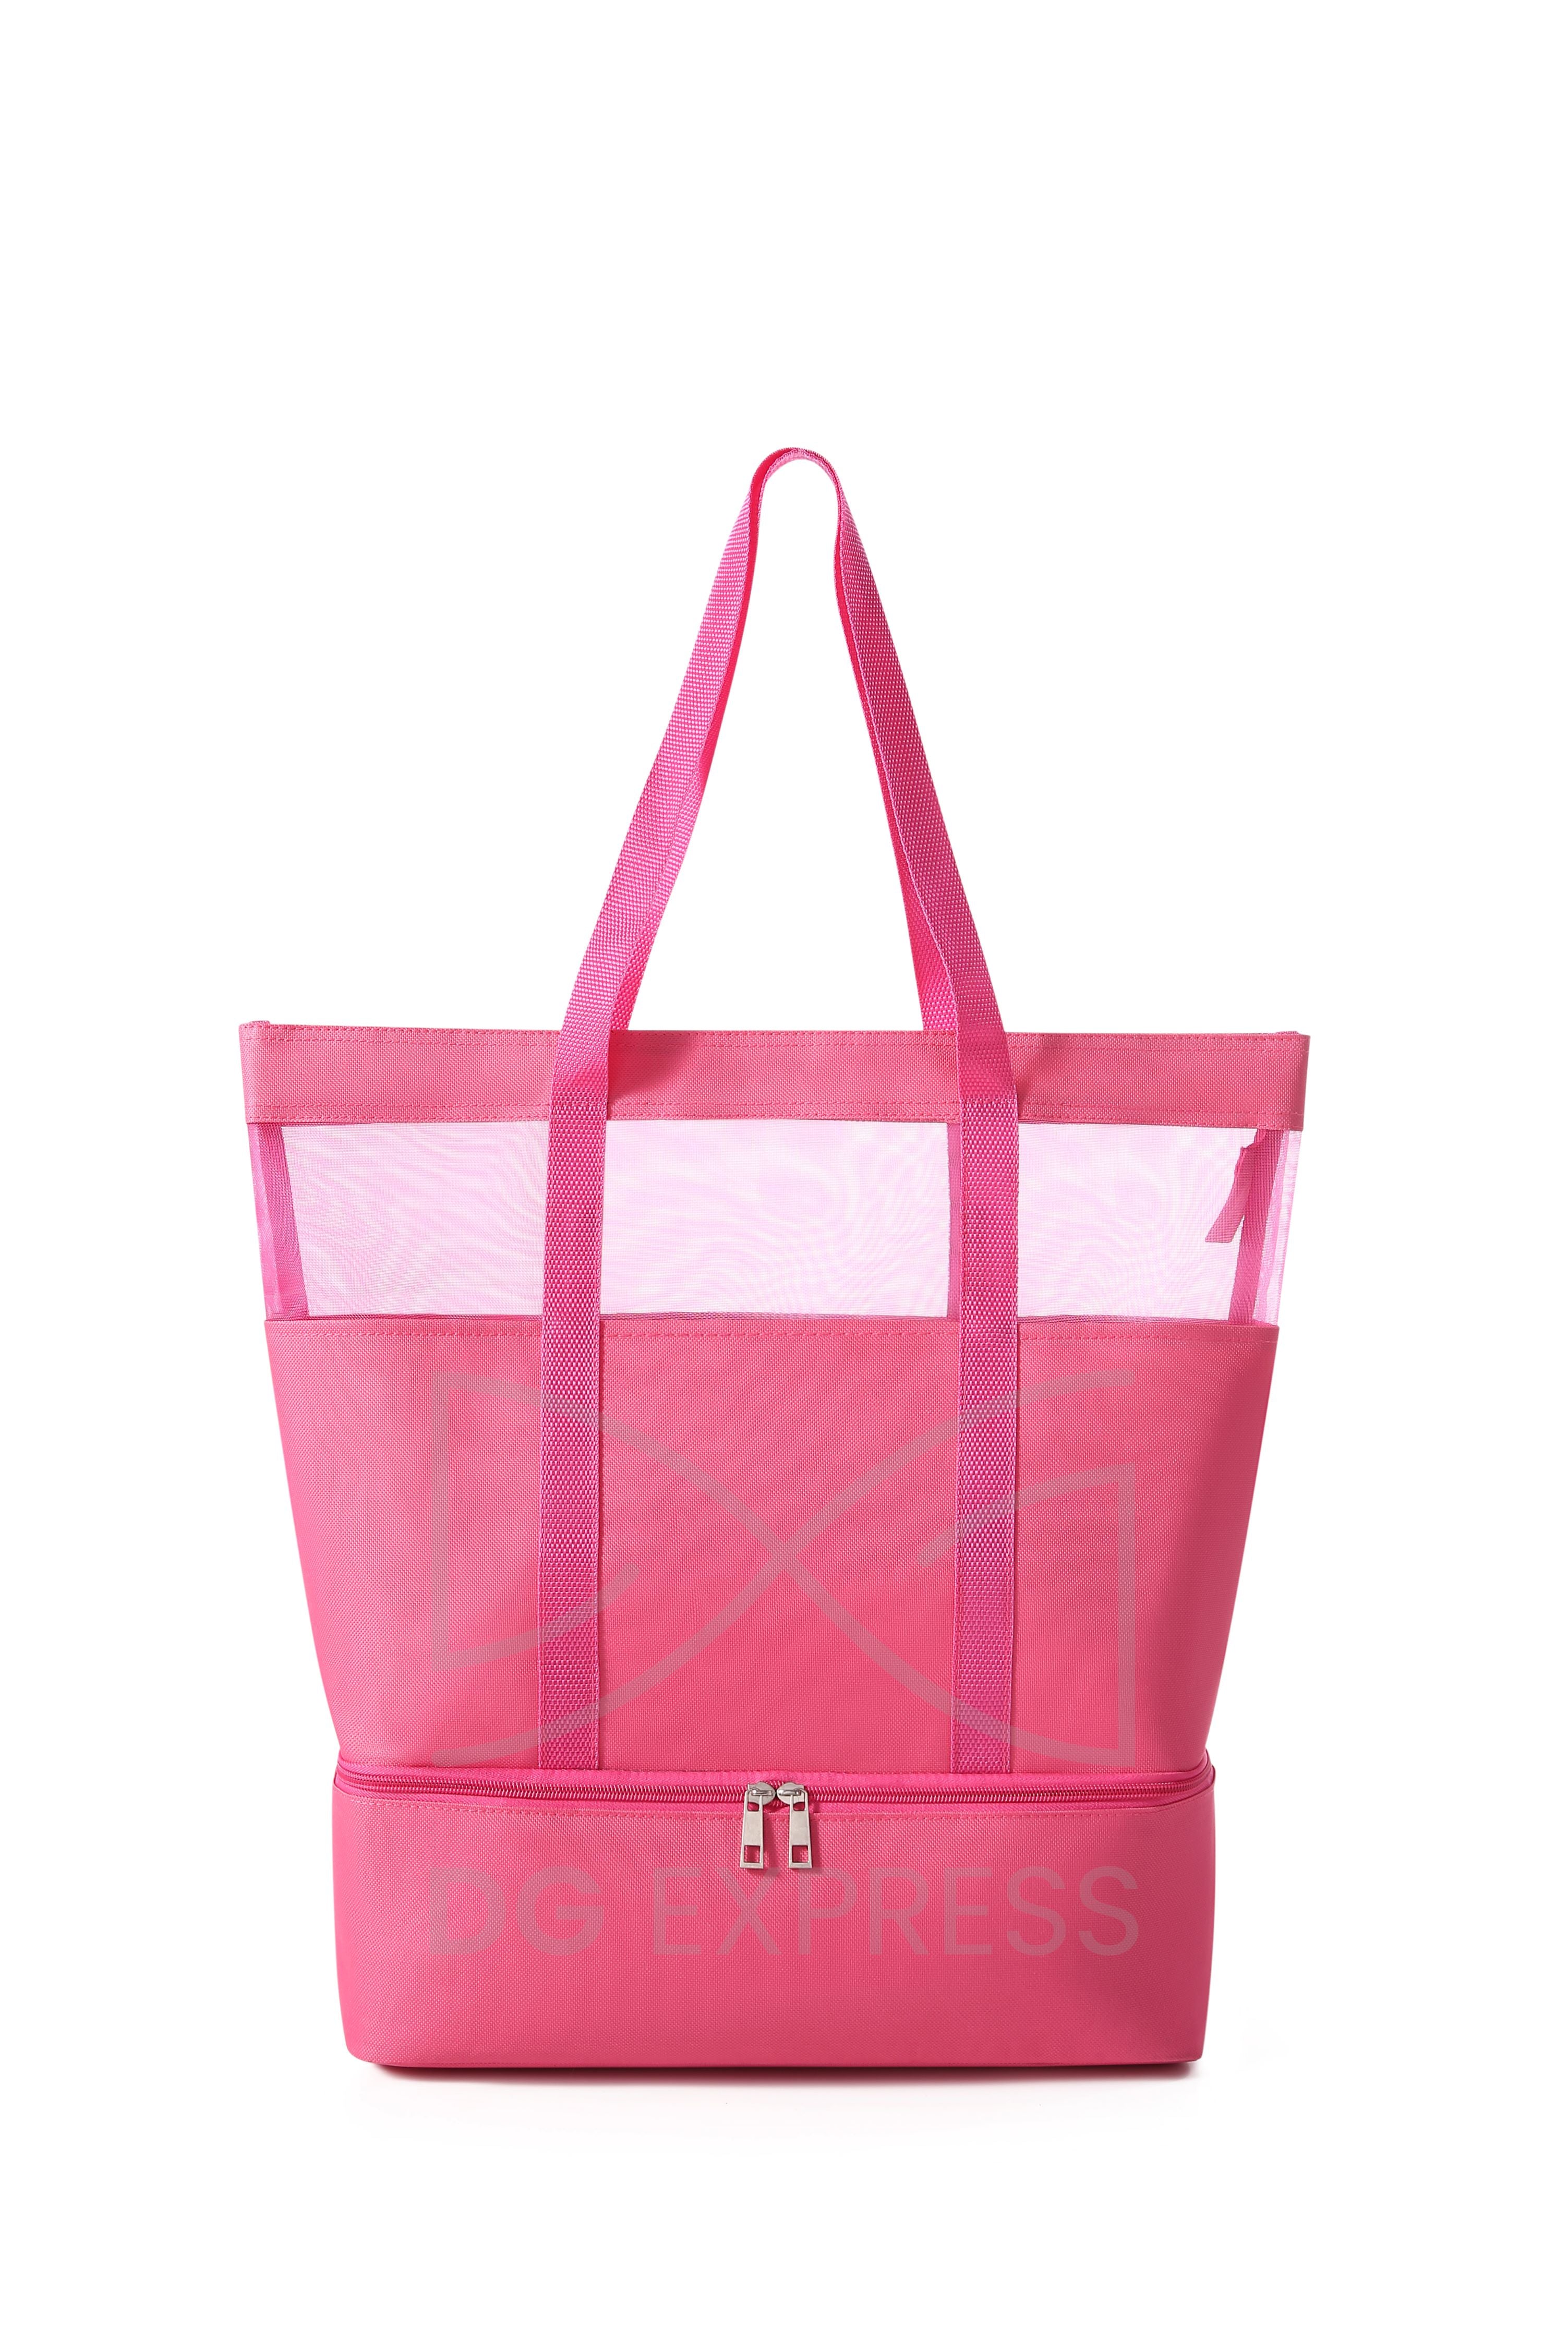 Abstract Pink Tote Bag With Insulated Cooler